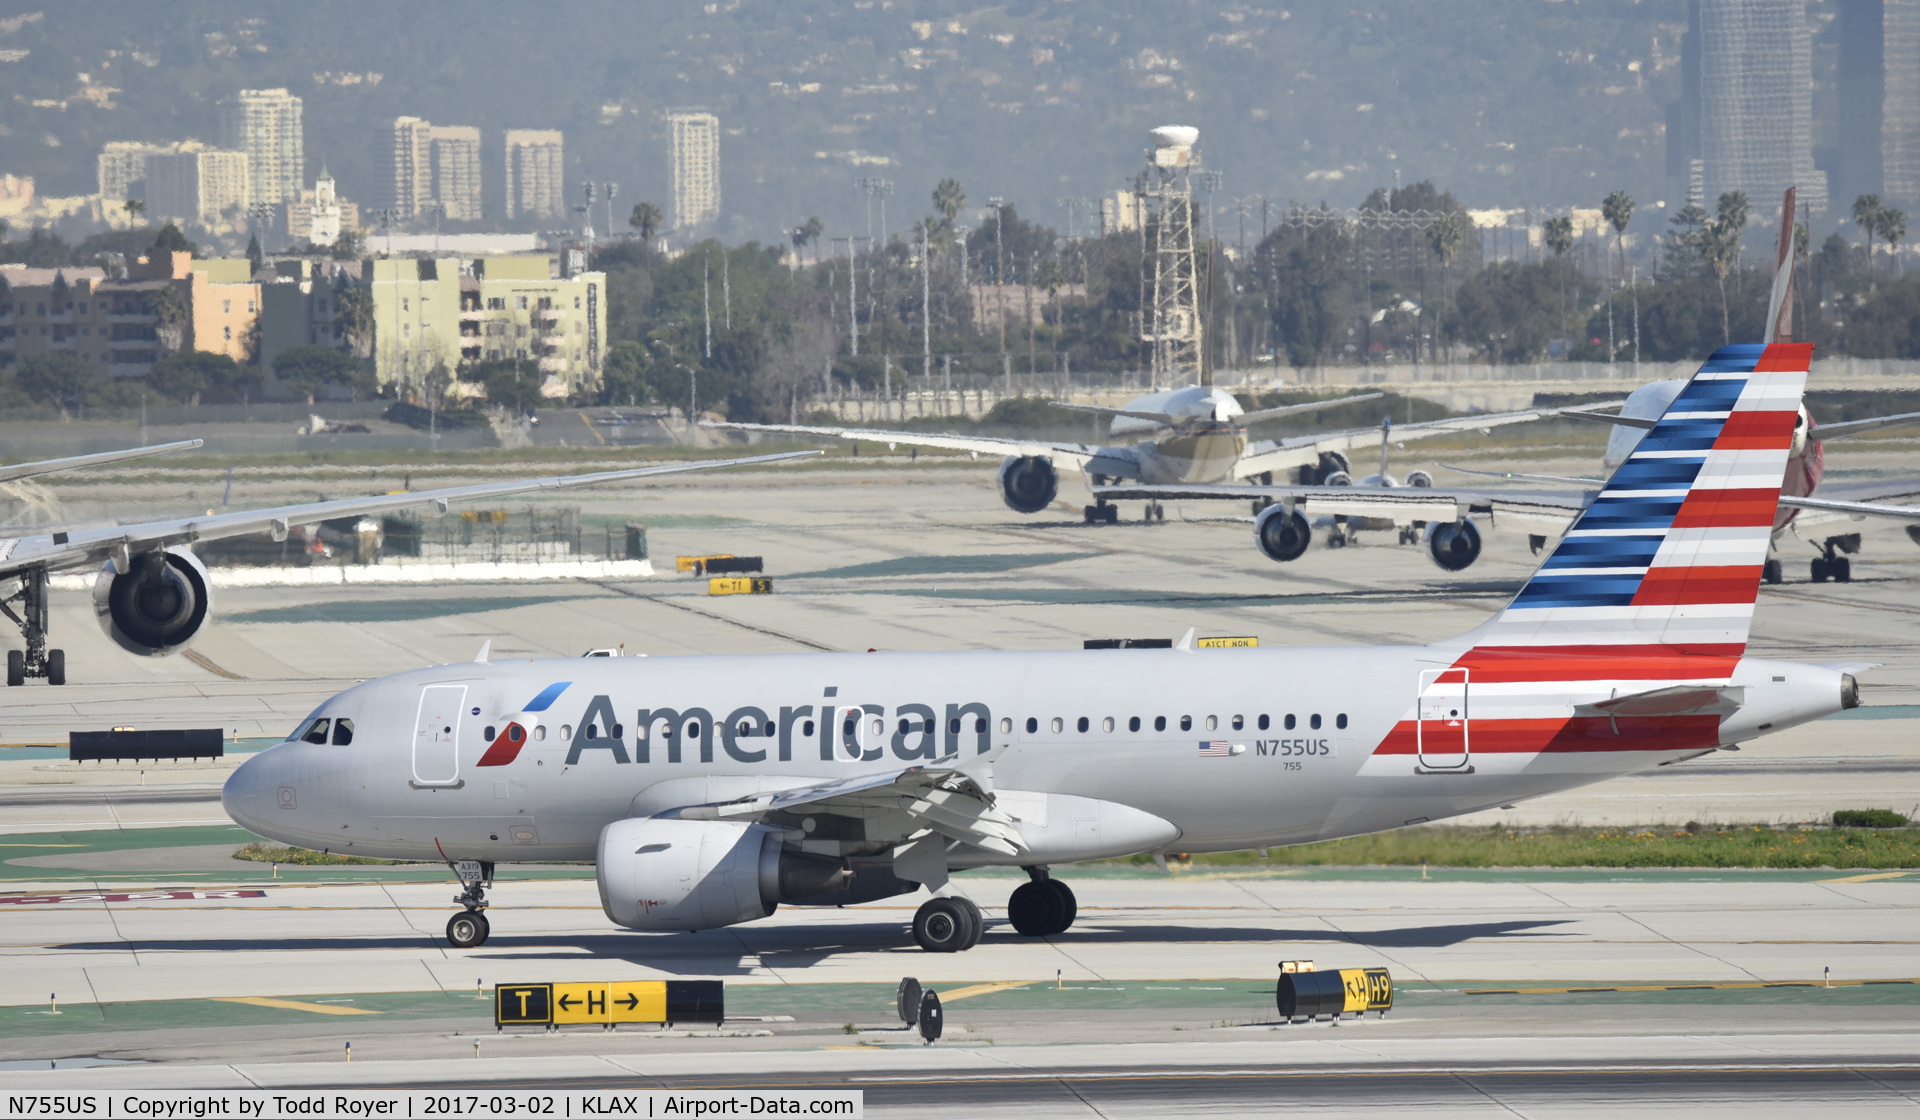 N755US, 2000 Airbus A319-112 C/N 1331, Arrived at LAX on 25L